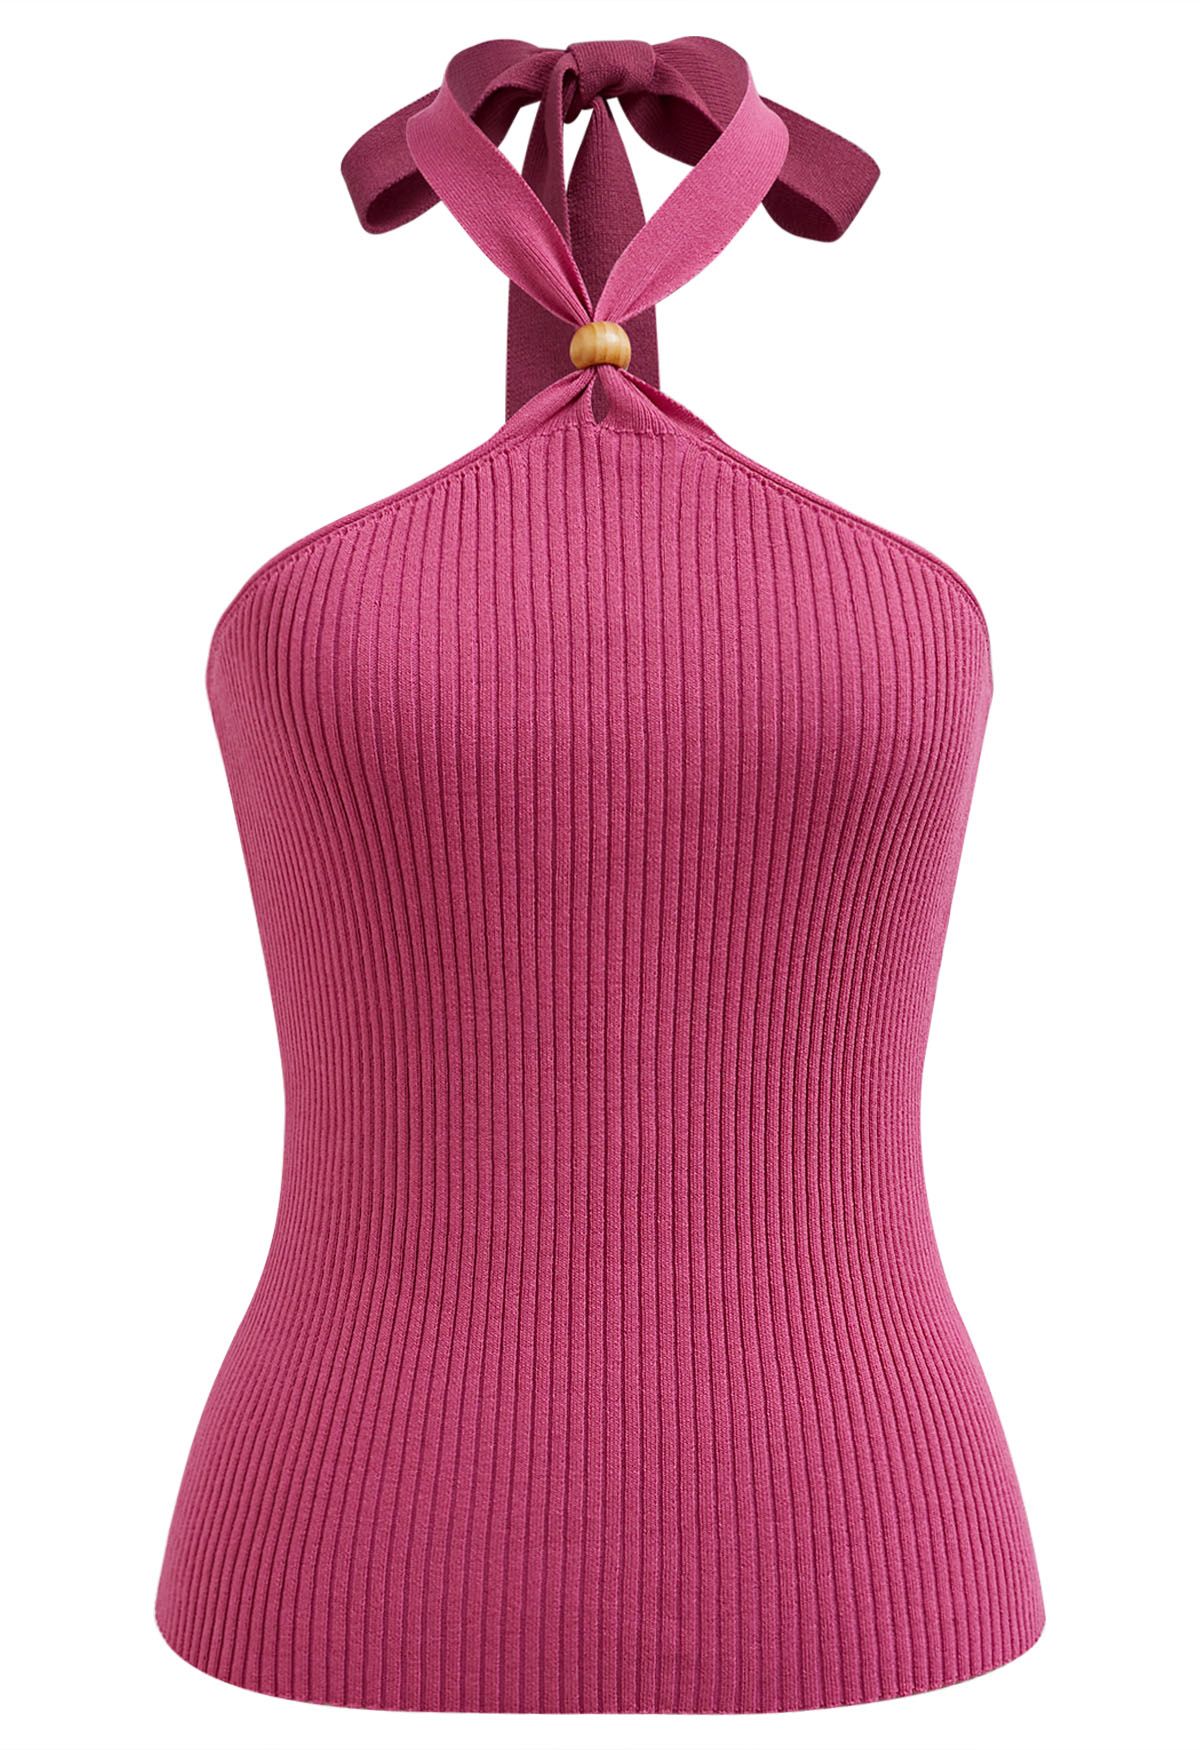 Wooden Bead Decor Halter Knit Top in Hot Pink